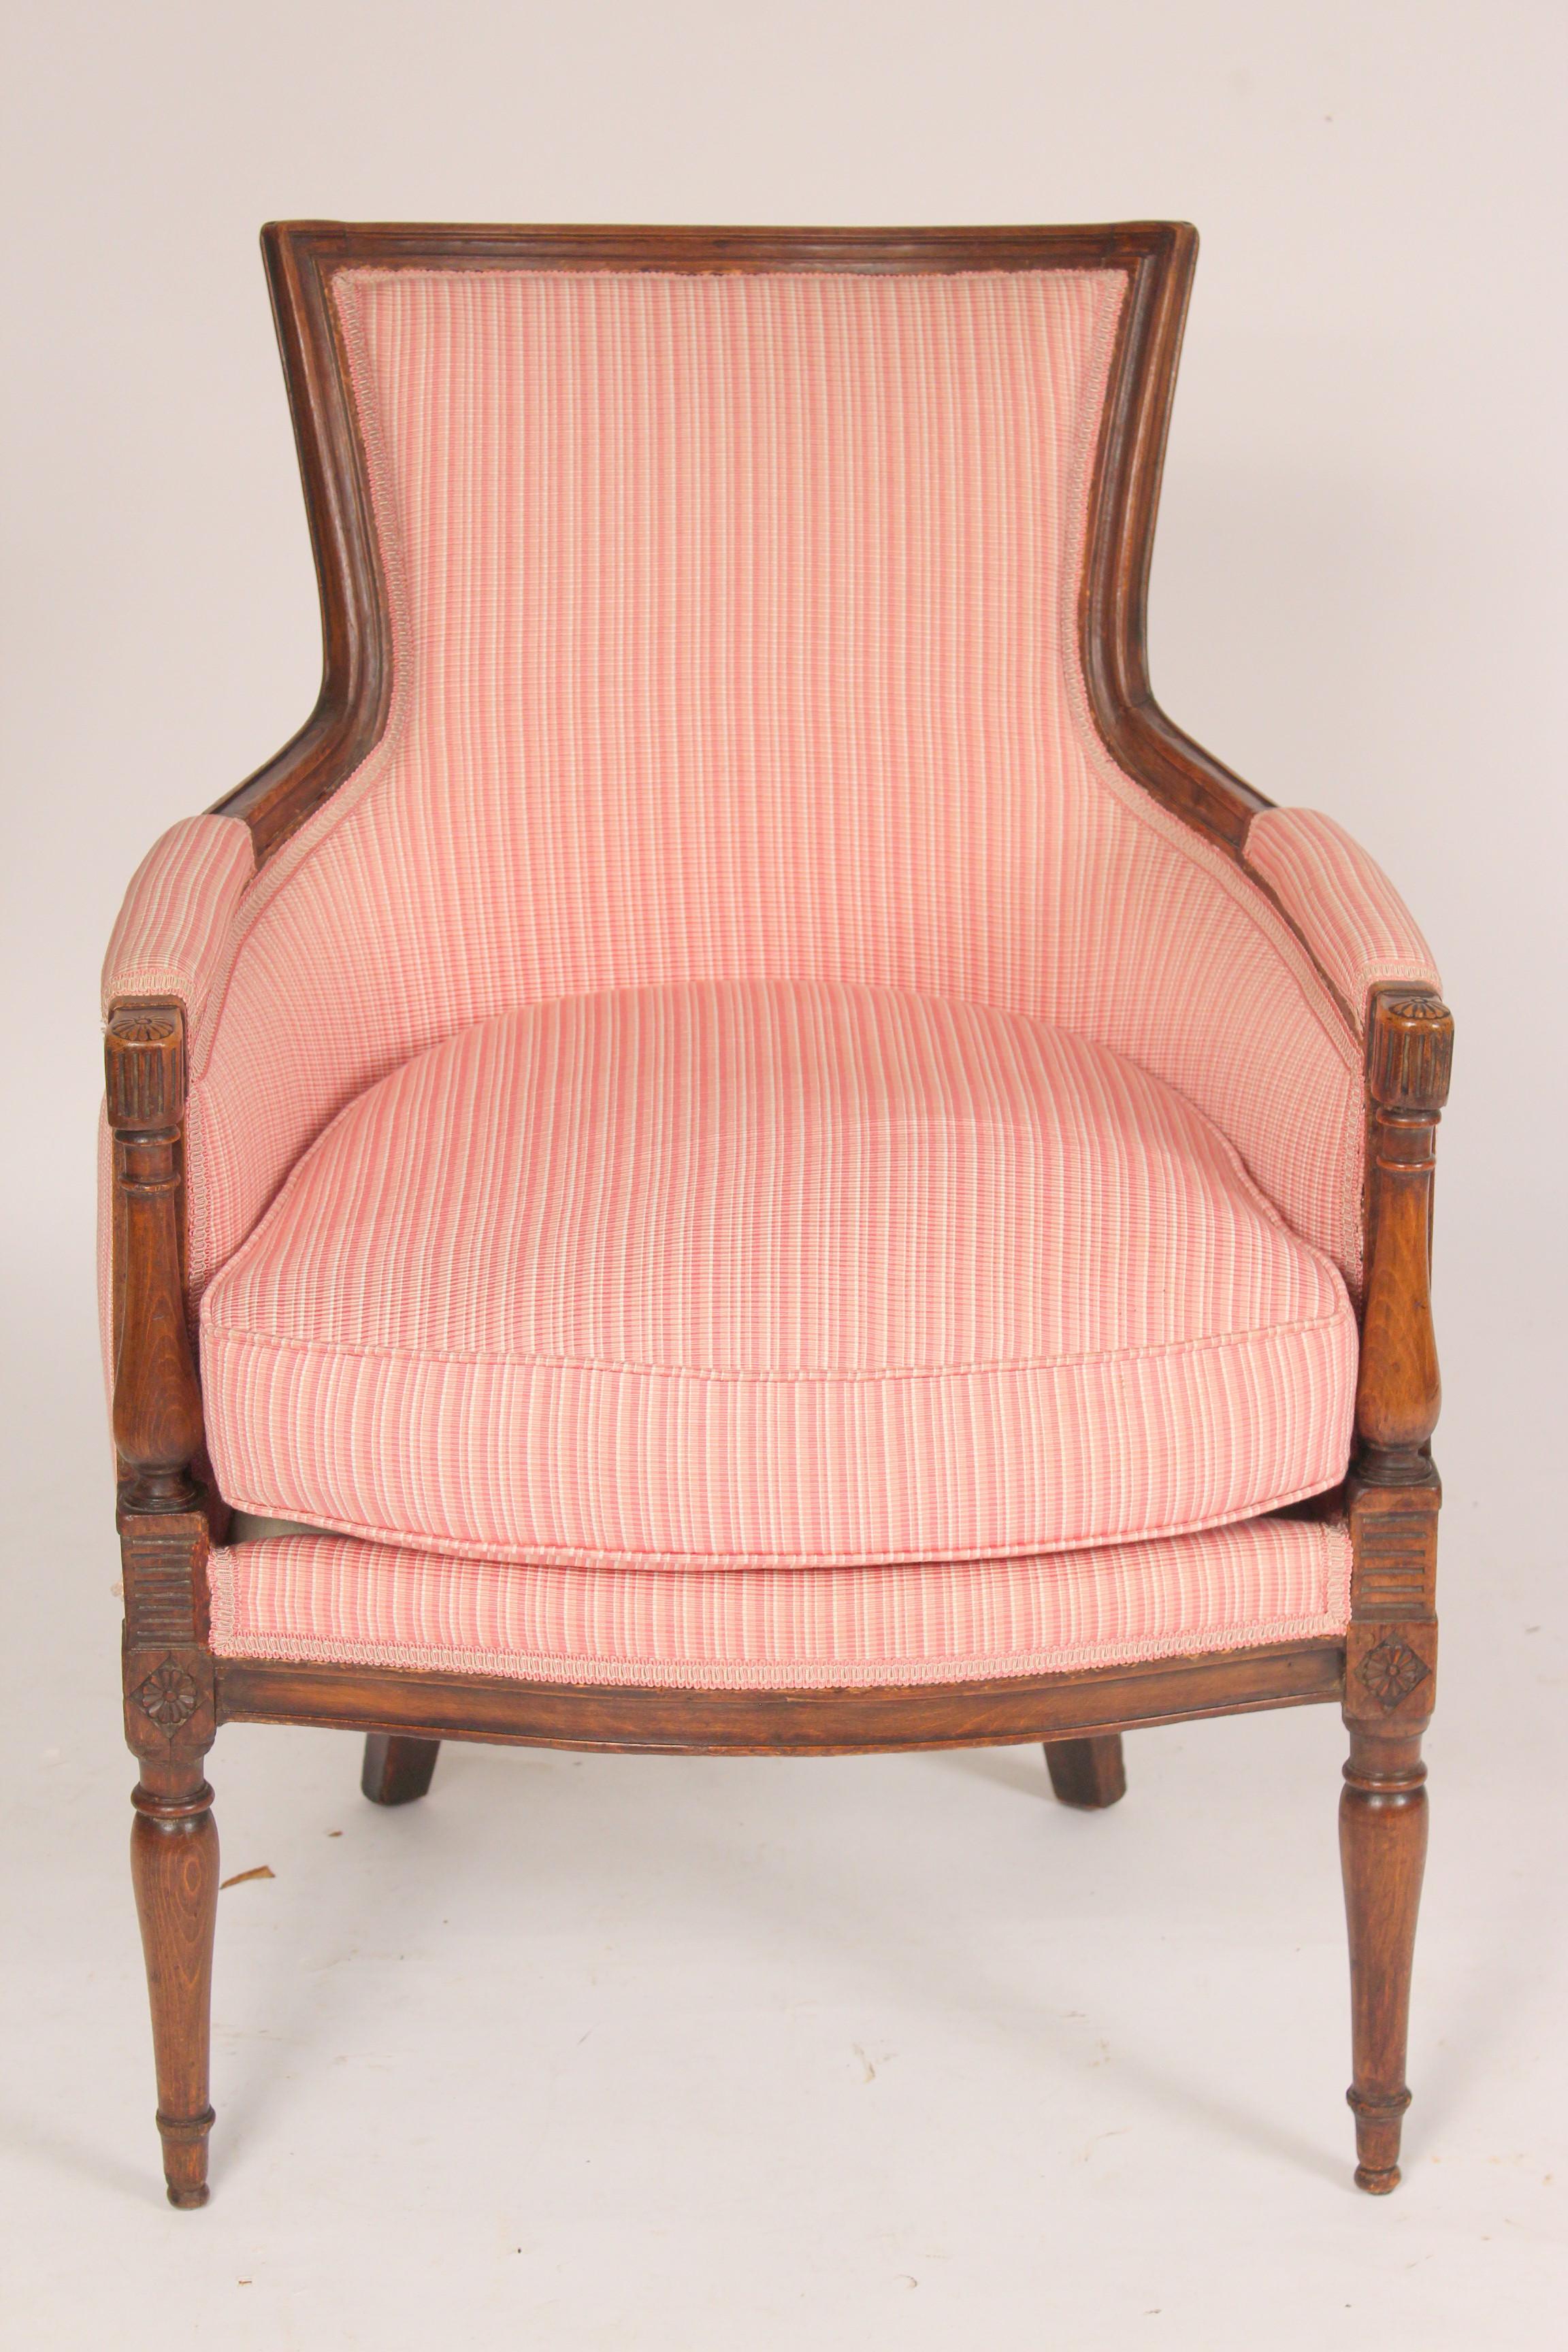 Antique Directoire style beech wood bergère, 19th century. The wood has nice old color, upholstery is in very good condition, recently reupholstered. Seat depth of 20